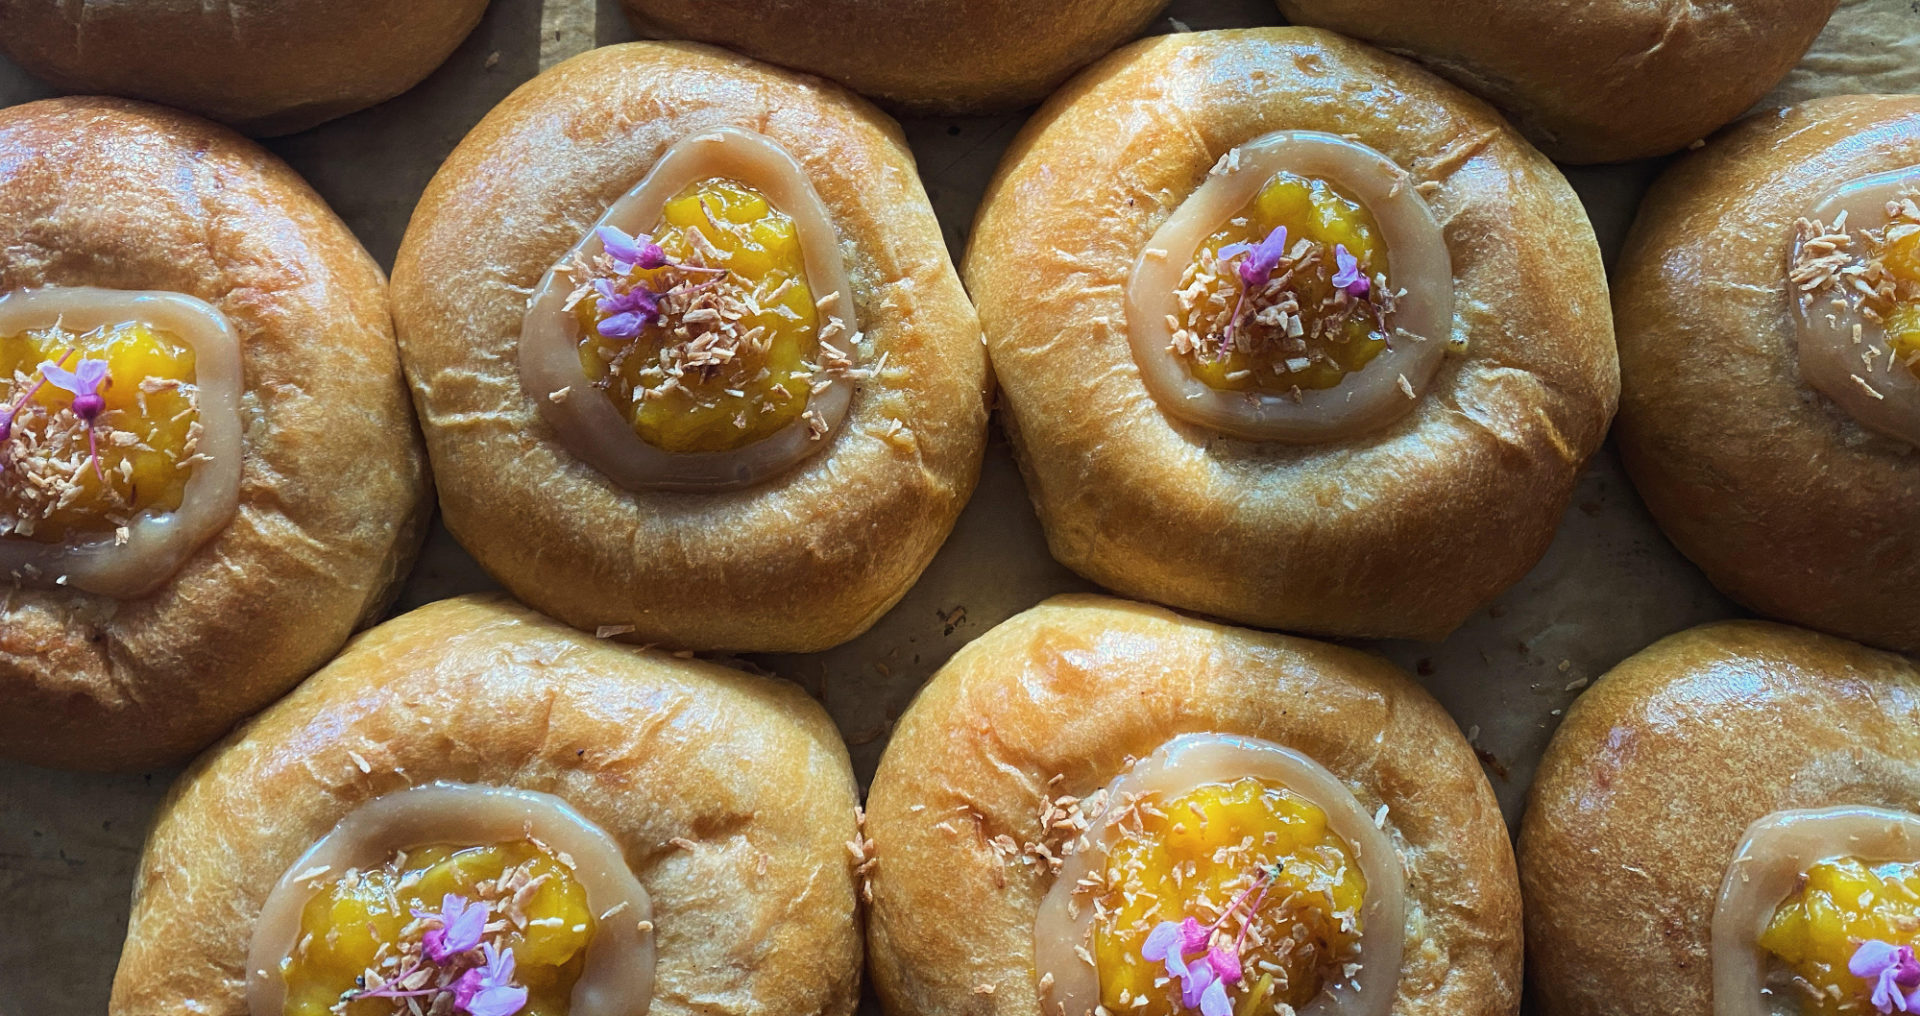 Several round pastries have a light orange center with a bright orange jam and edible flowers.